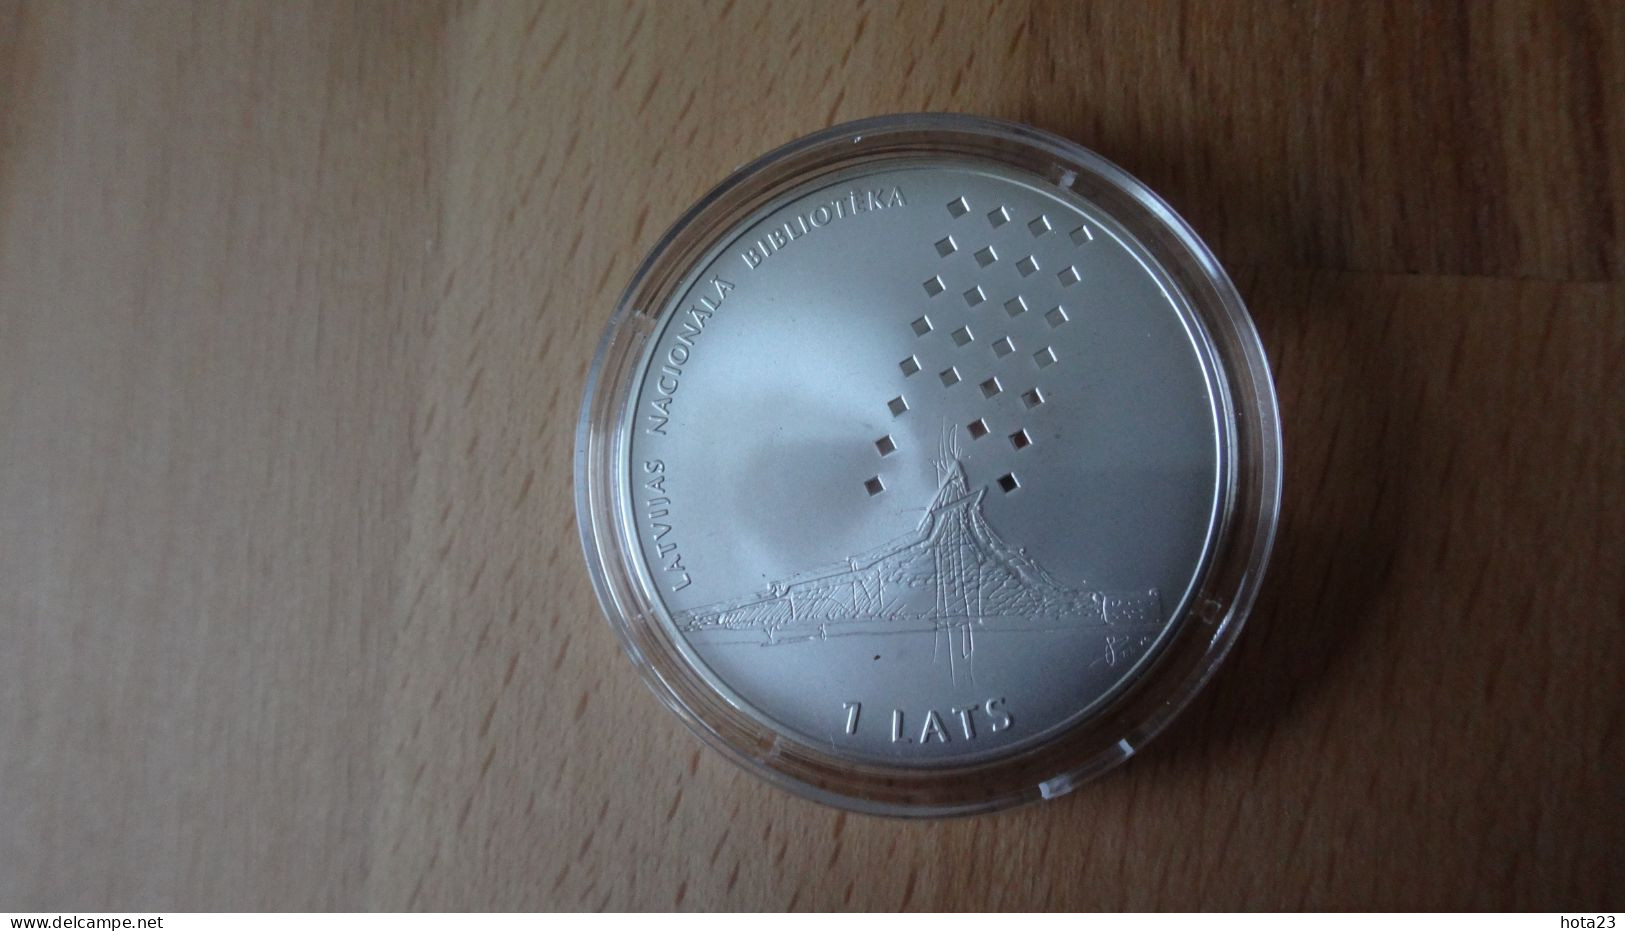 (!) LATVIA ,Lettland , Lettonia SILVER COIN 1 LATS National Library PROOF 2002 Y Modern Architekture - Lettland